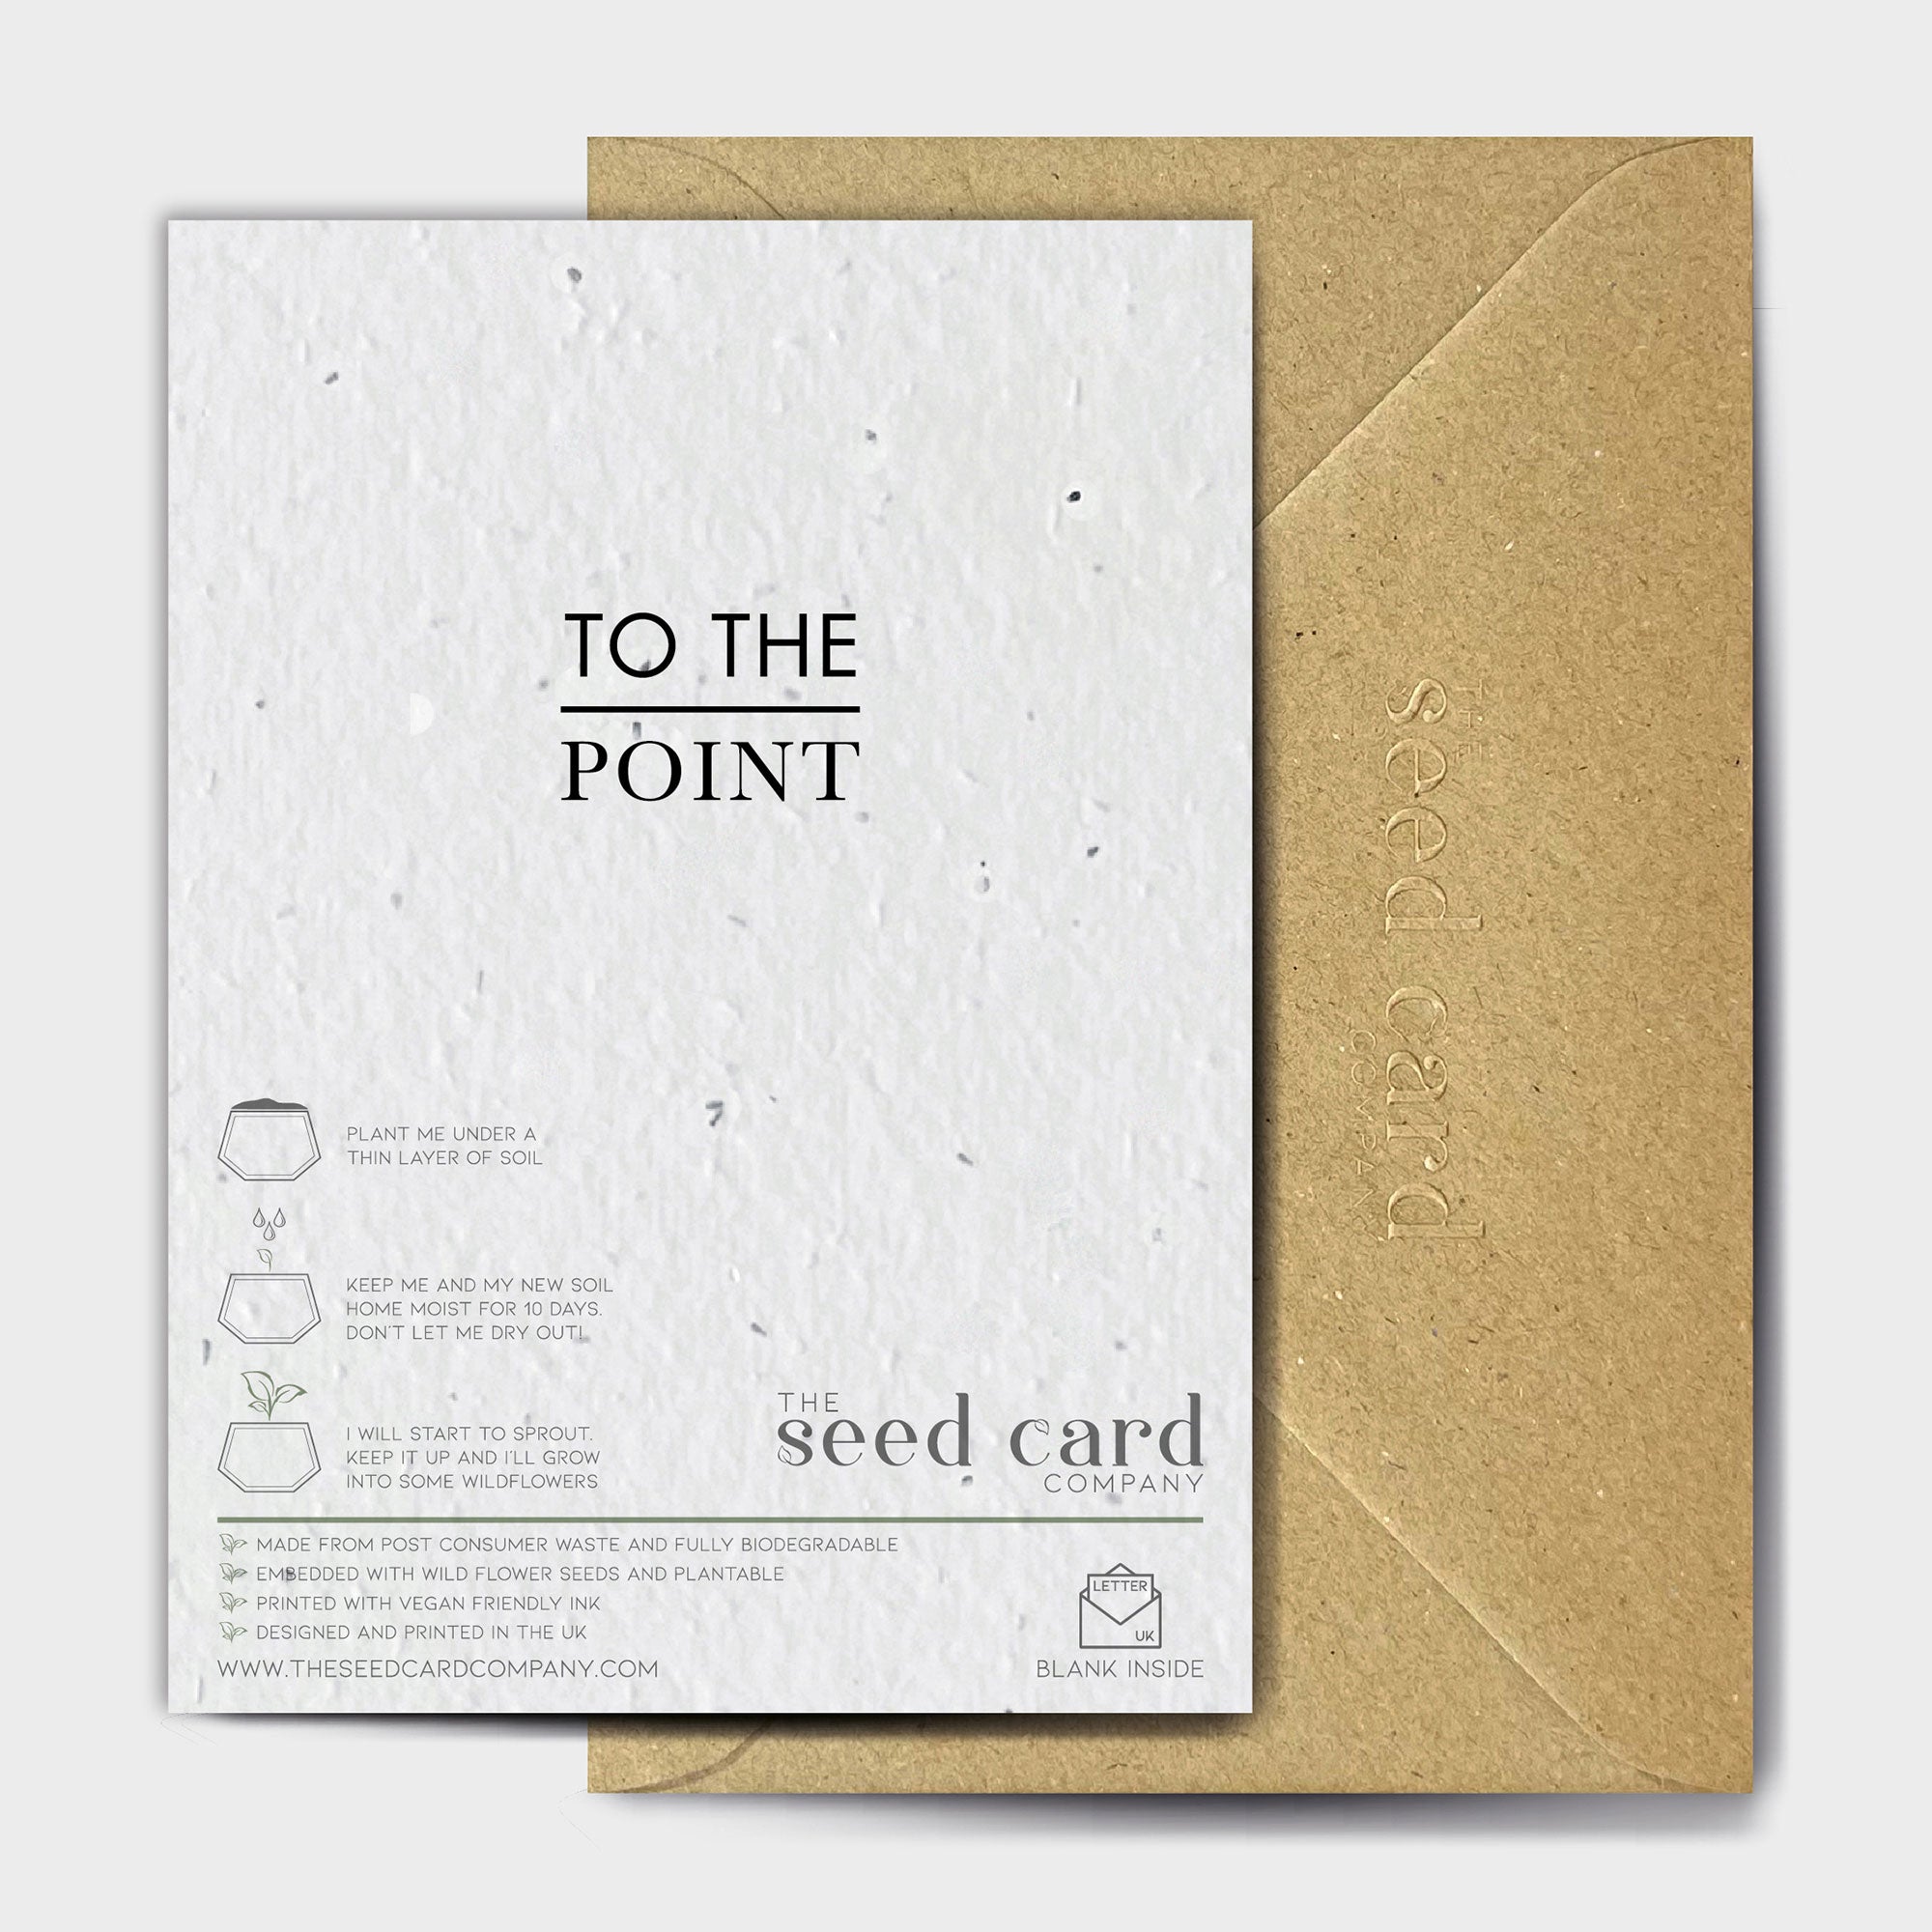 Shop online Honesty Is The Best Policy - 100% biodegradable seed-embedded cards Shop -The Seed Card Company